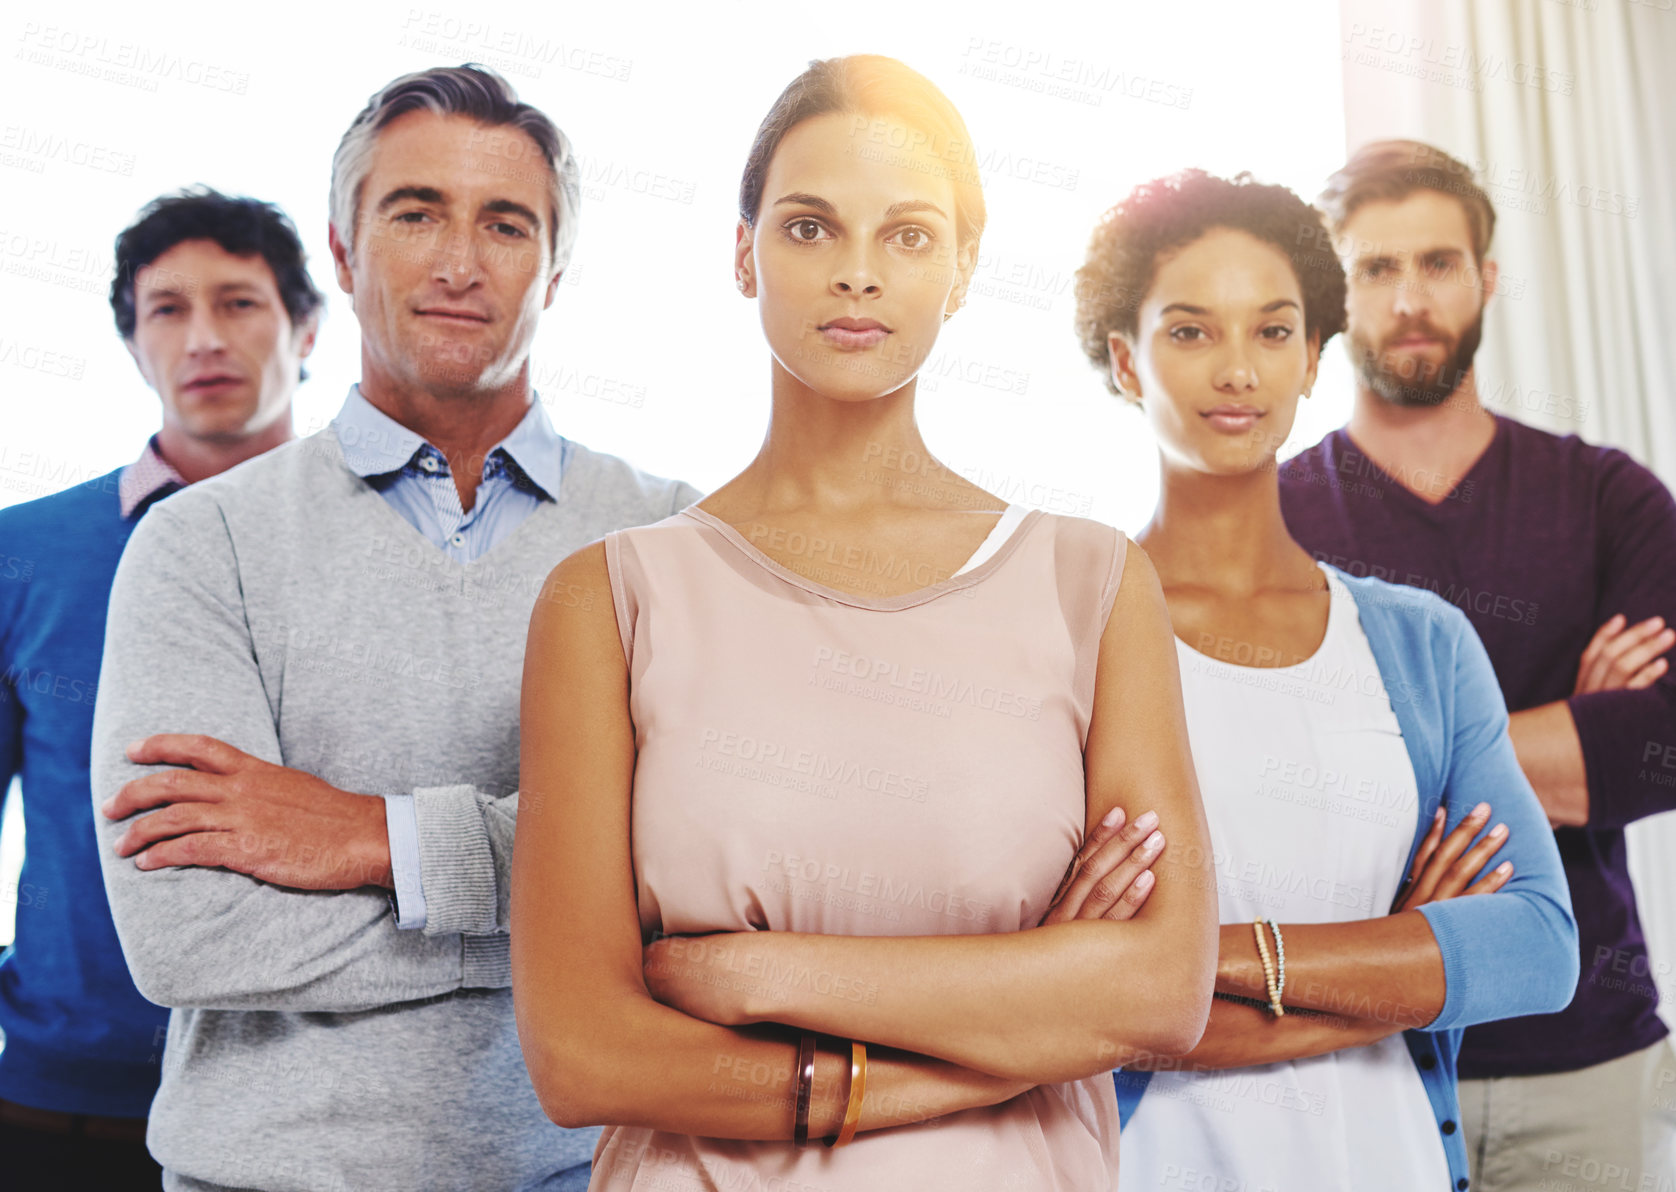 Buy stock photo Cropped portrait of a diverse business team